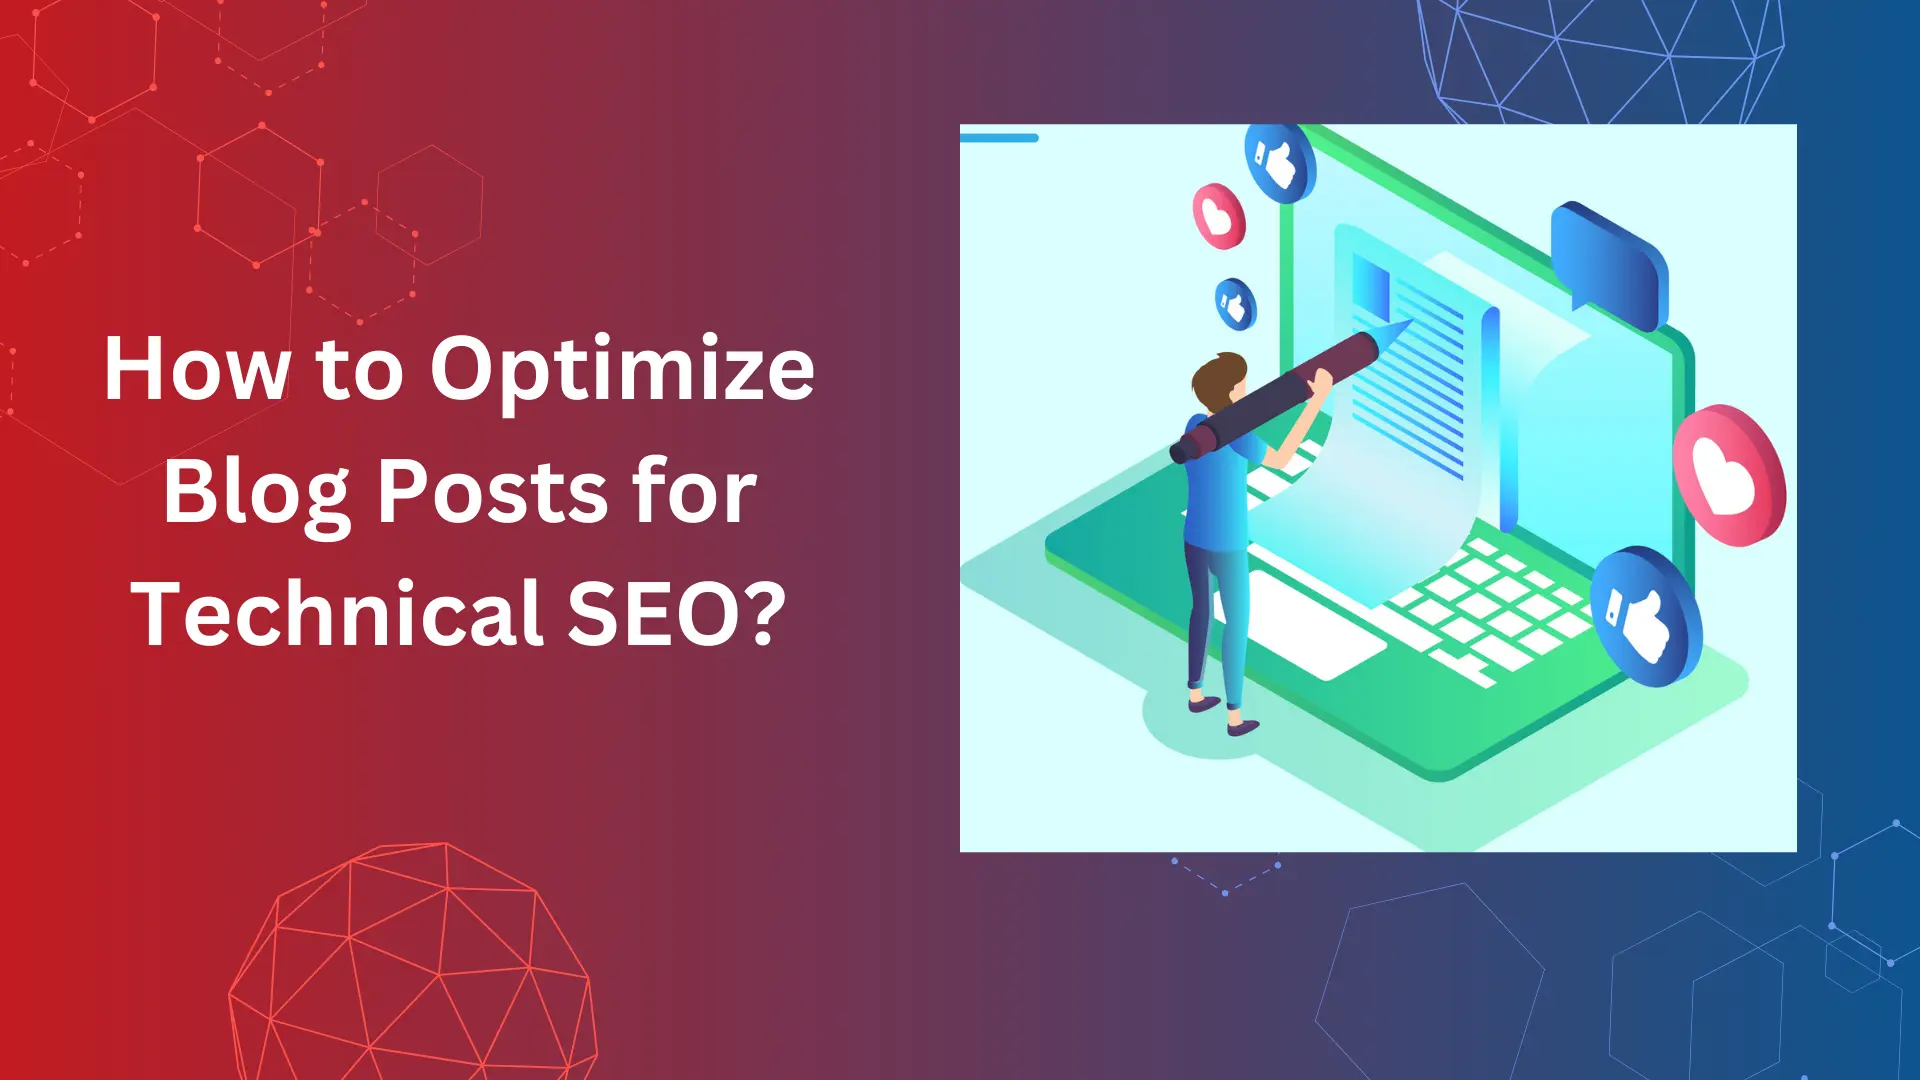 How to optimize blog posts for Technical SEO